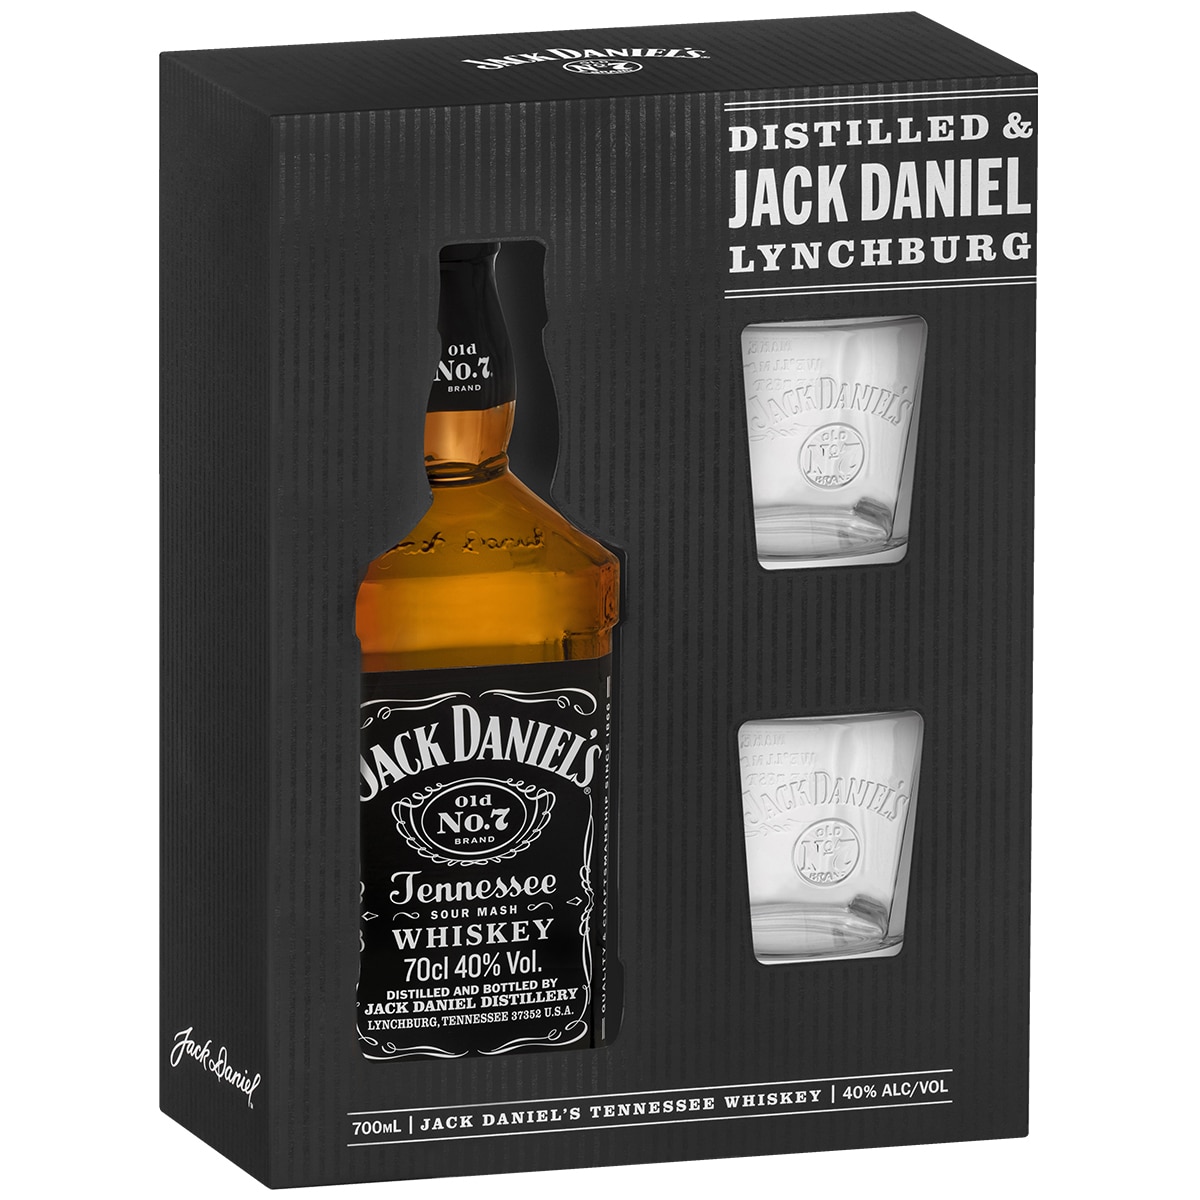 Jack Daniel's Old No. 7 Tennessee Sour Mash Whiskey 700mL + Glasses Giftpack